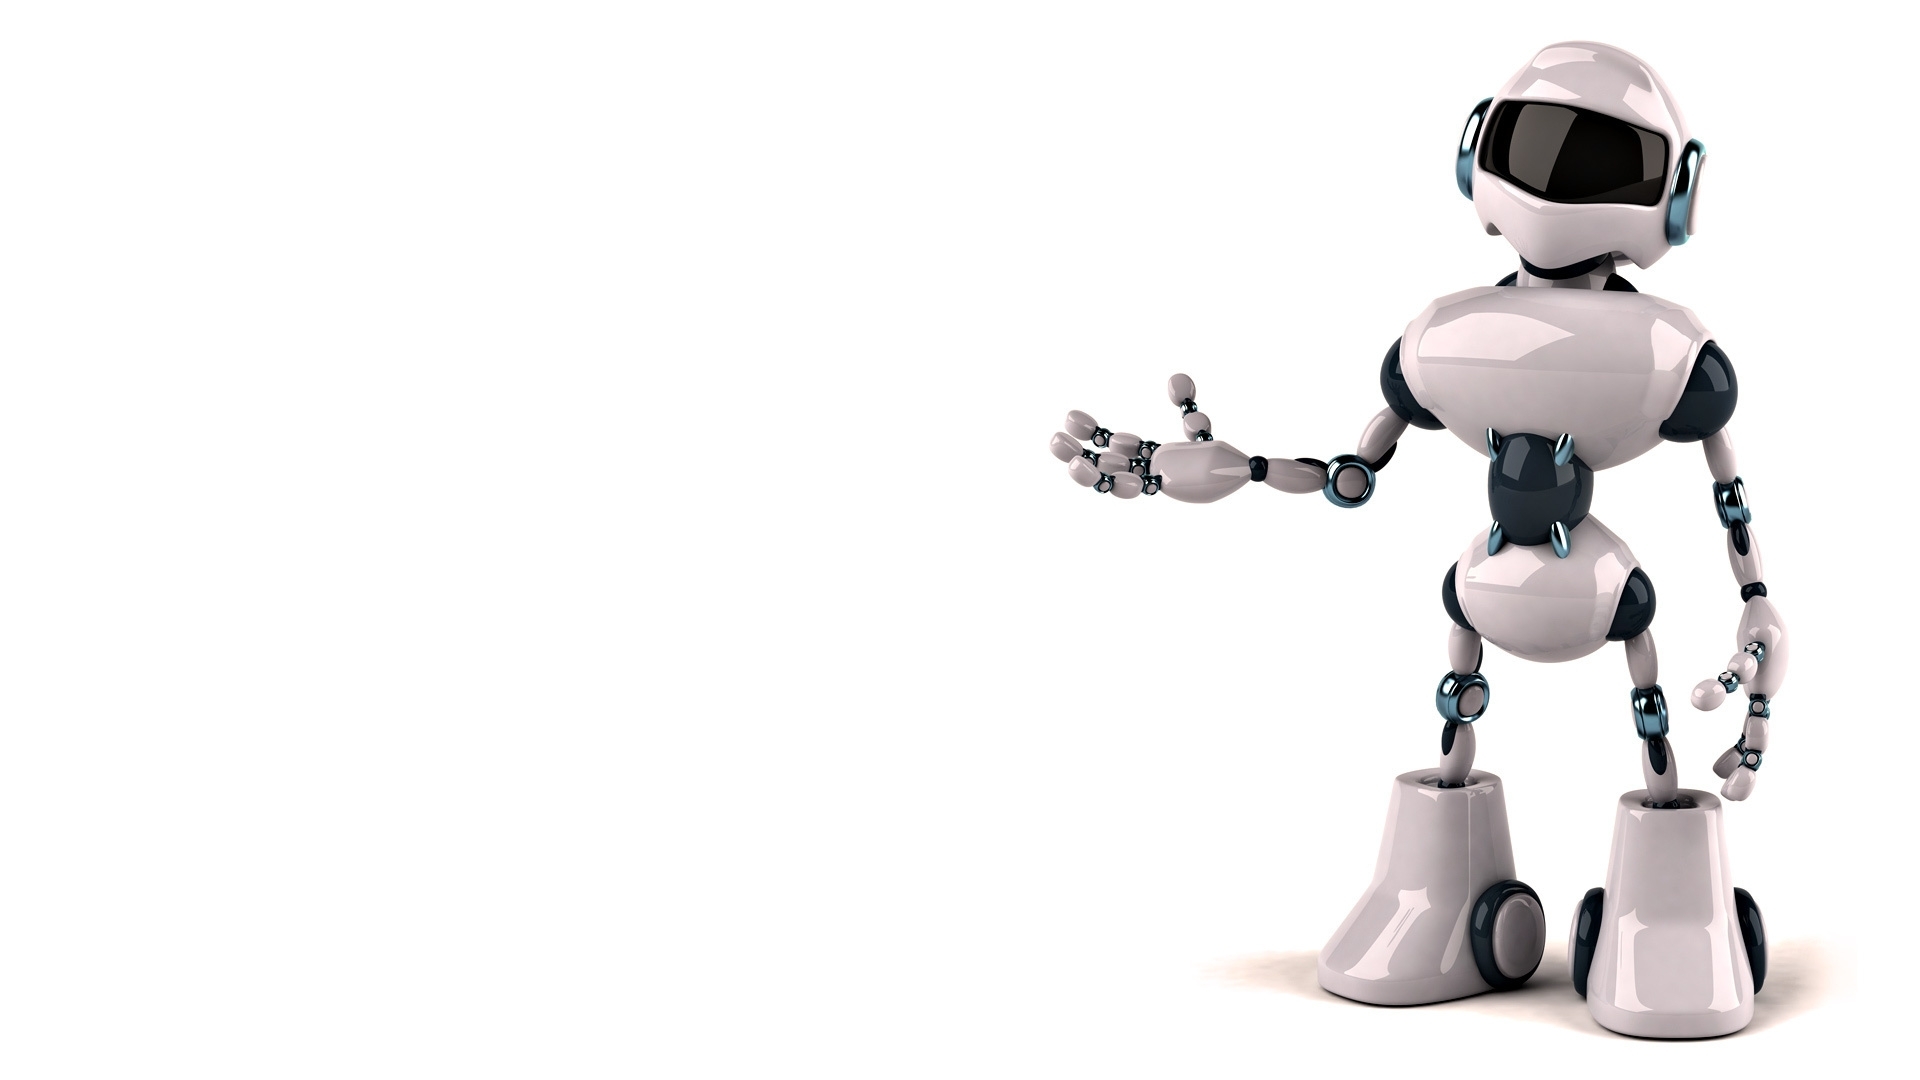 Hd Wallpapers Of Robot For Pc